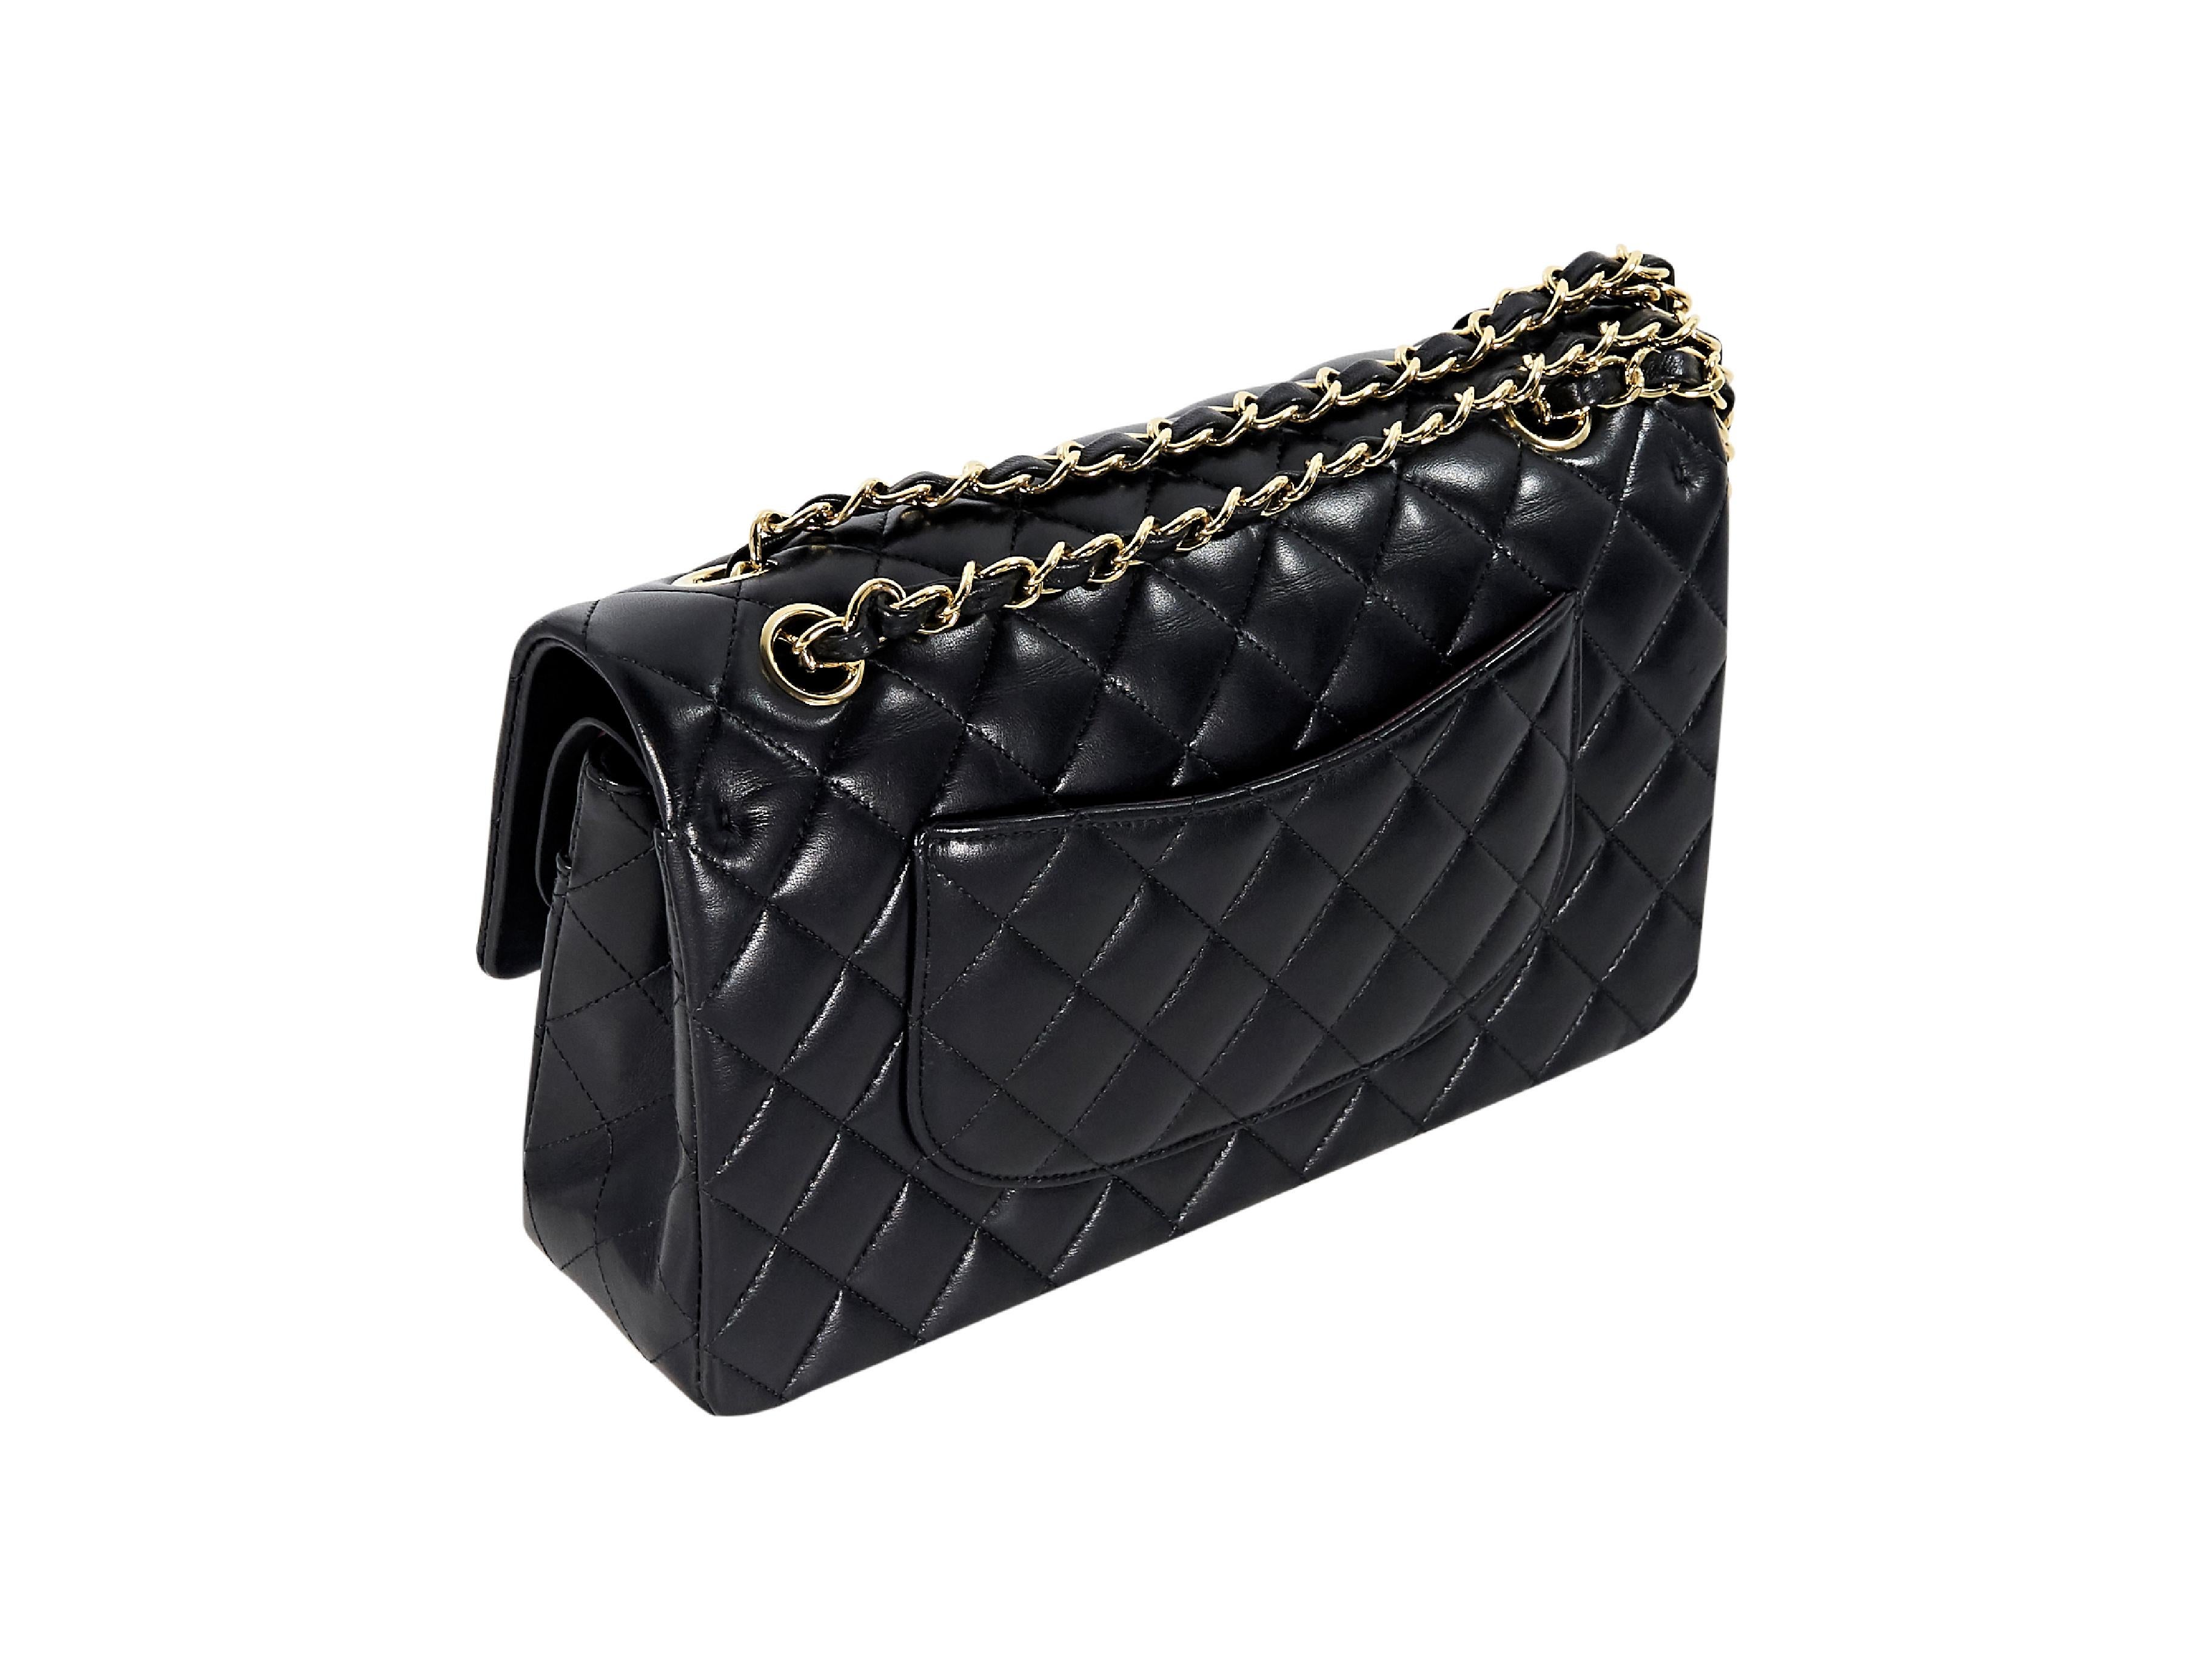 Product details:  Black quilted leather double flap shoulder bag by Chanel.  Dual chain shoulder straps.  Front flap with twist-lock closure.  Leather lined interior with inner zip and slide pockets.  Back exterior slide pocket.  Goldtone hardware. 